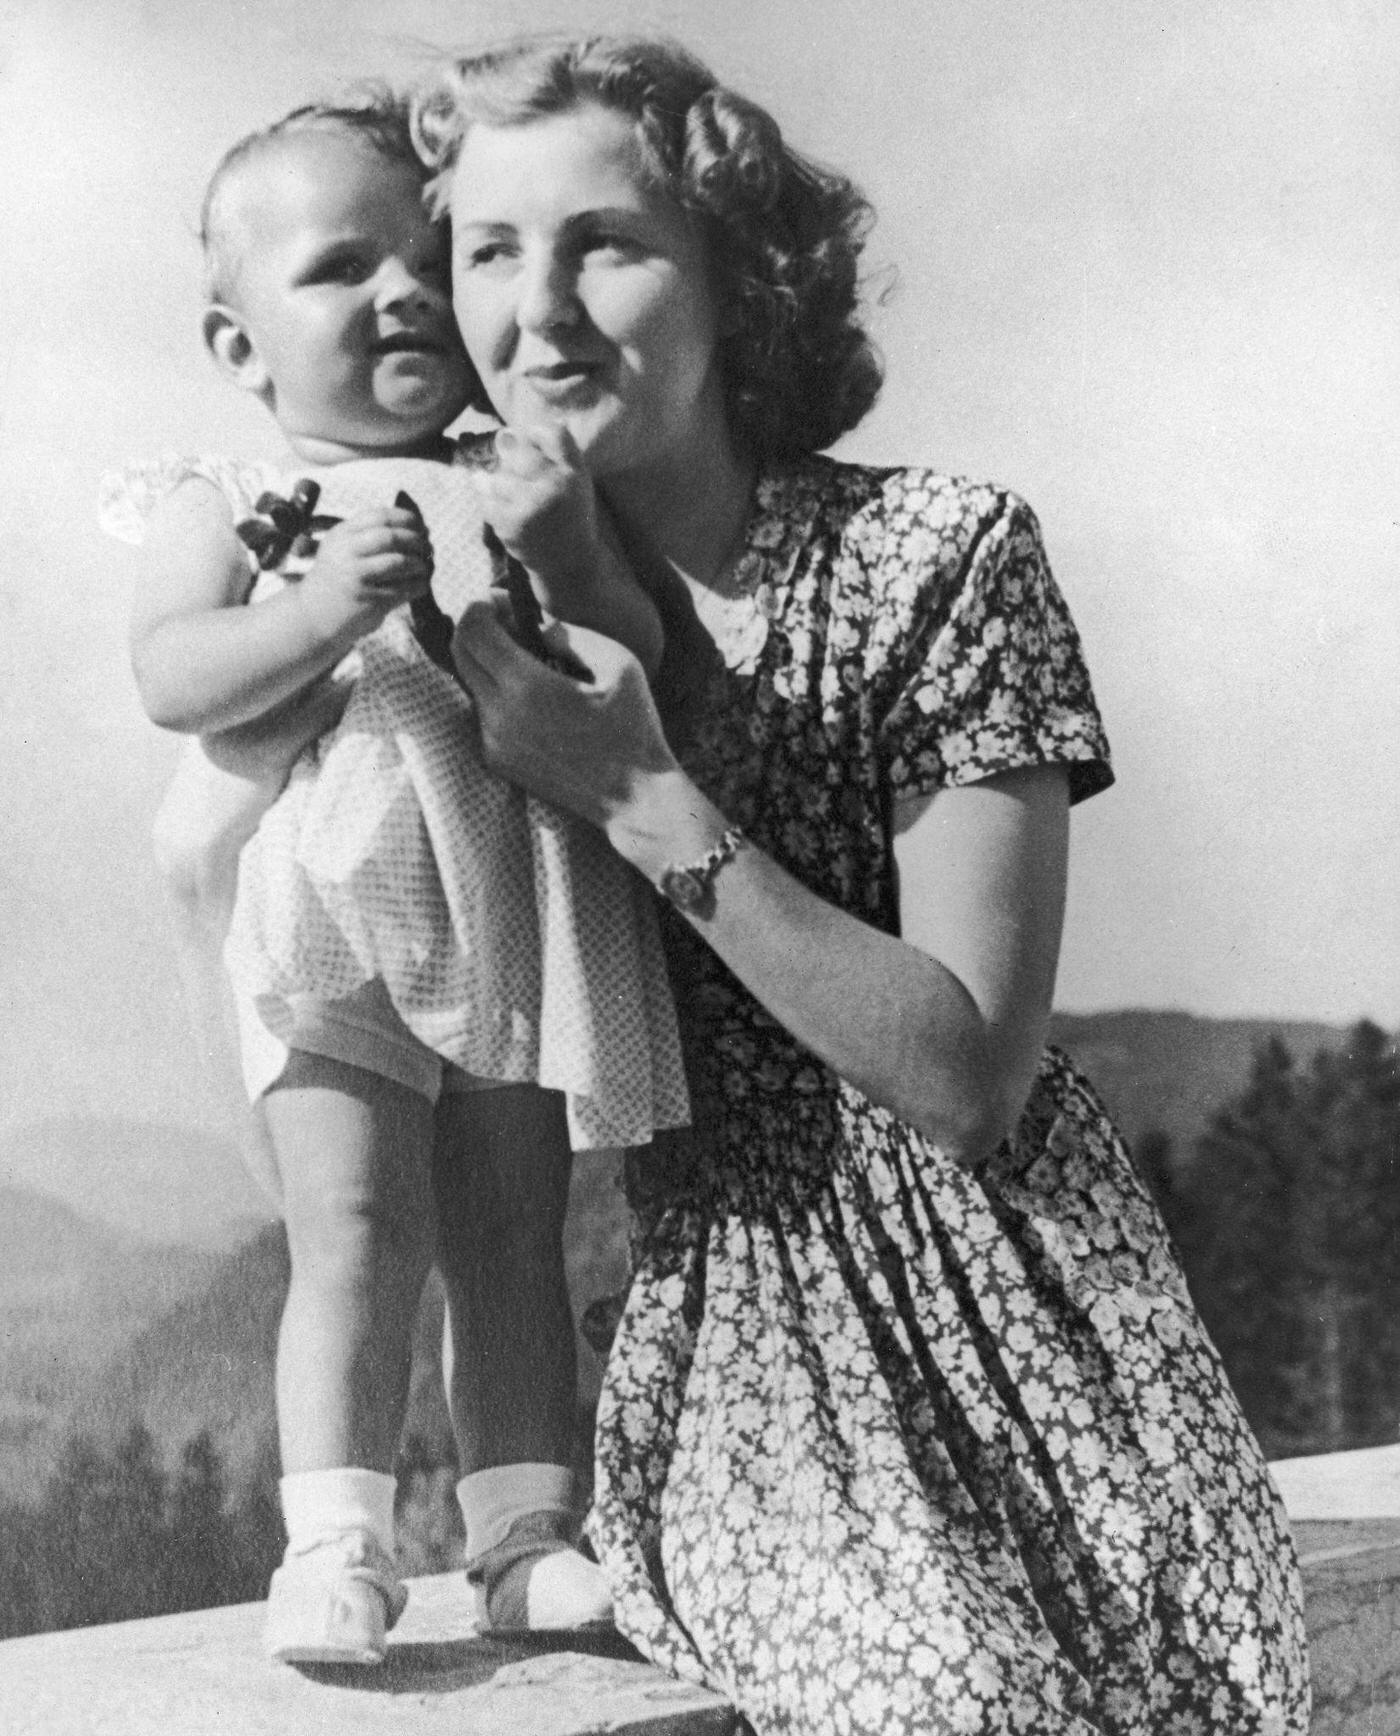 Eva Braun poses on a terrace with an infant, still from a home movie taken by her sister, circa 1942